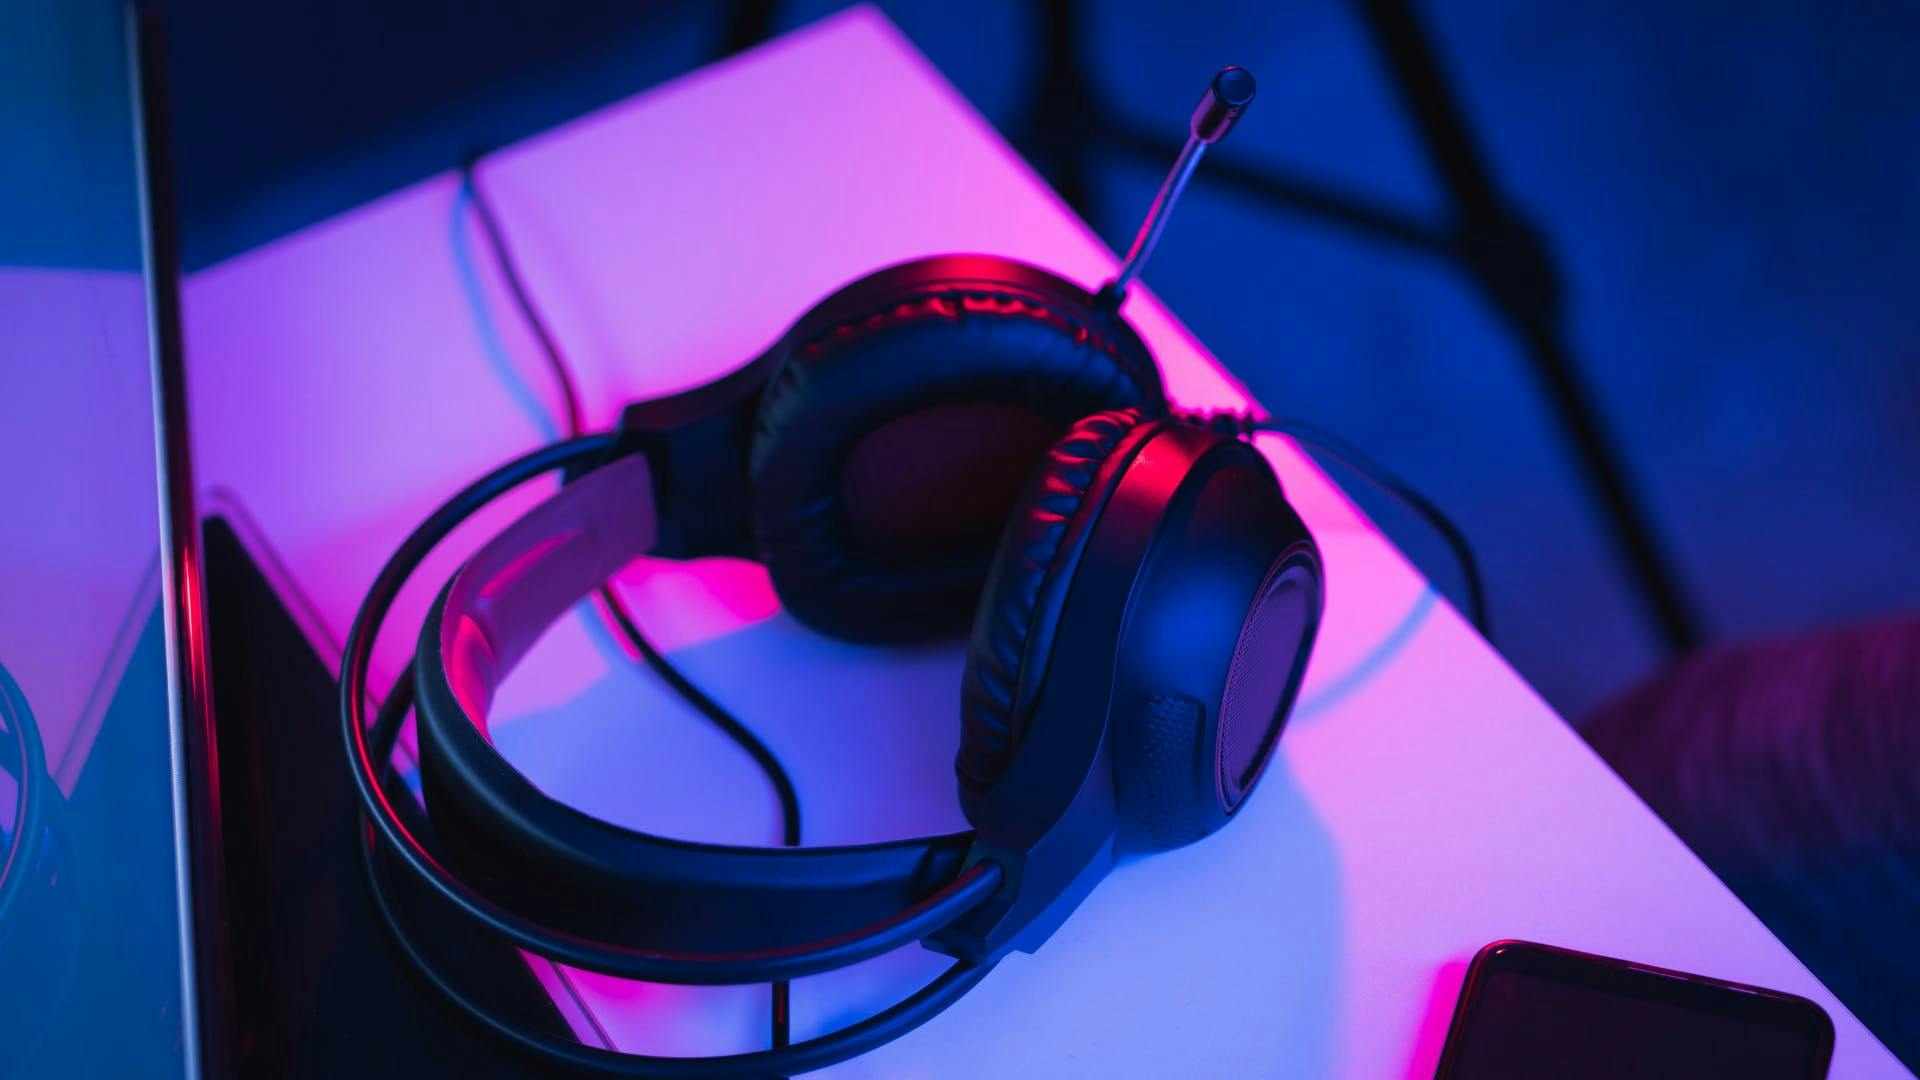 A gaming headset on a gaming desk in a glowing pink LED gaming setup